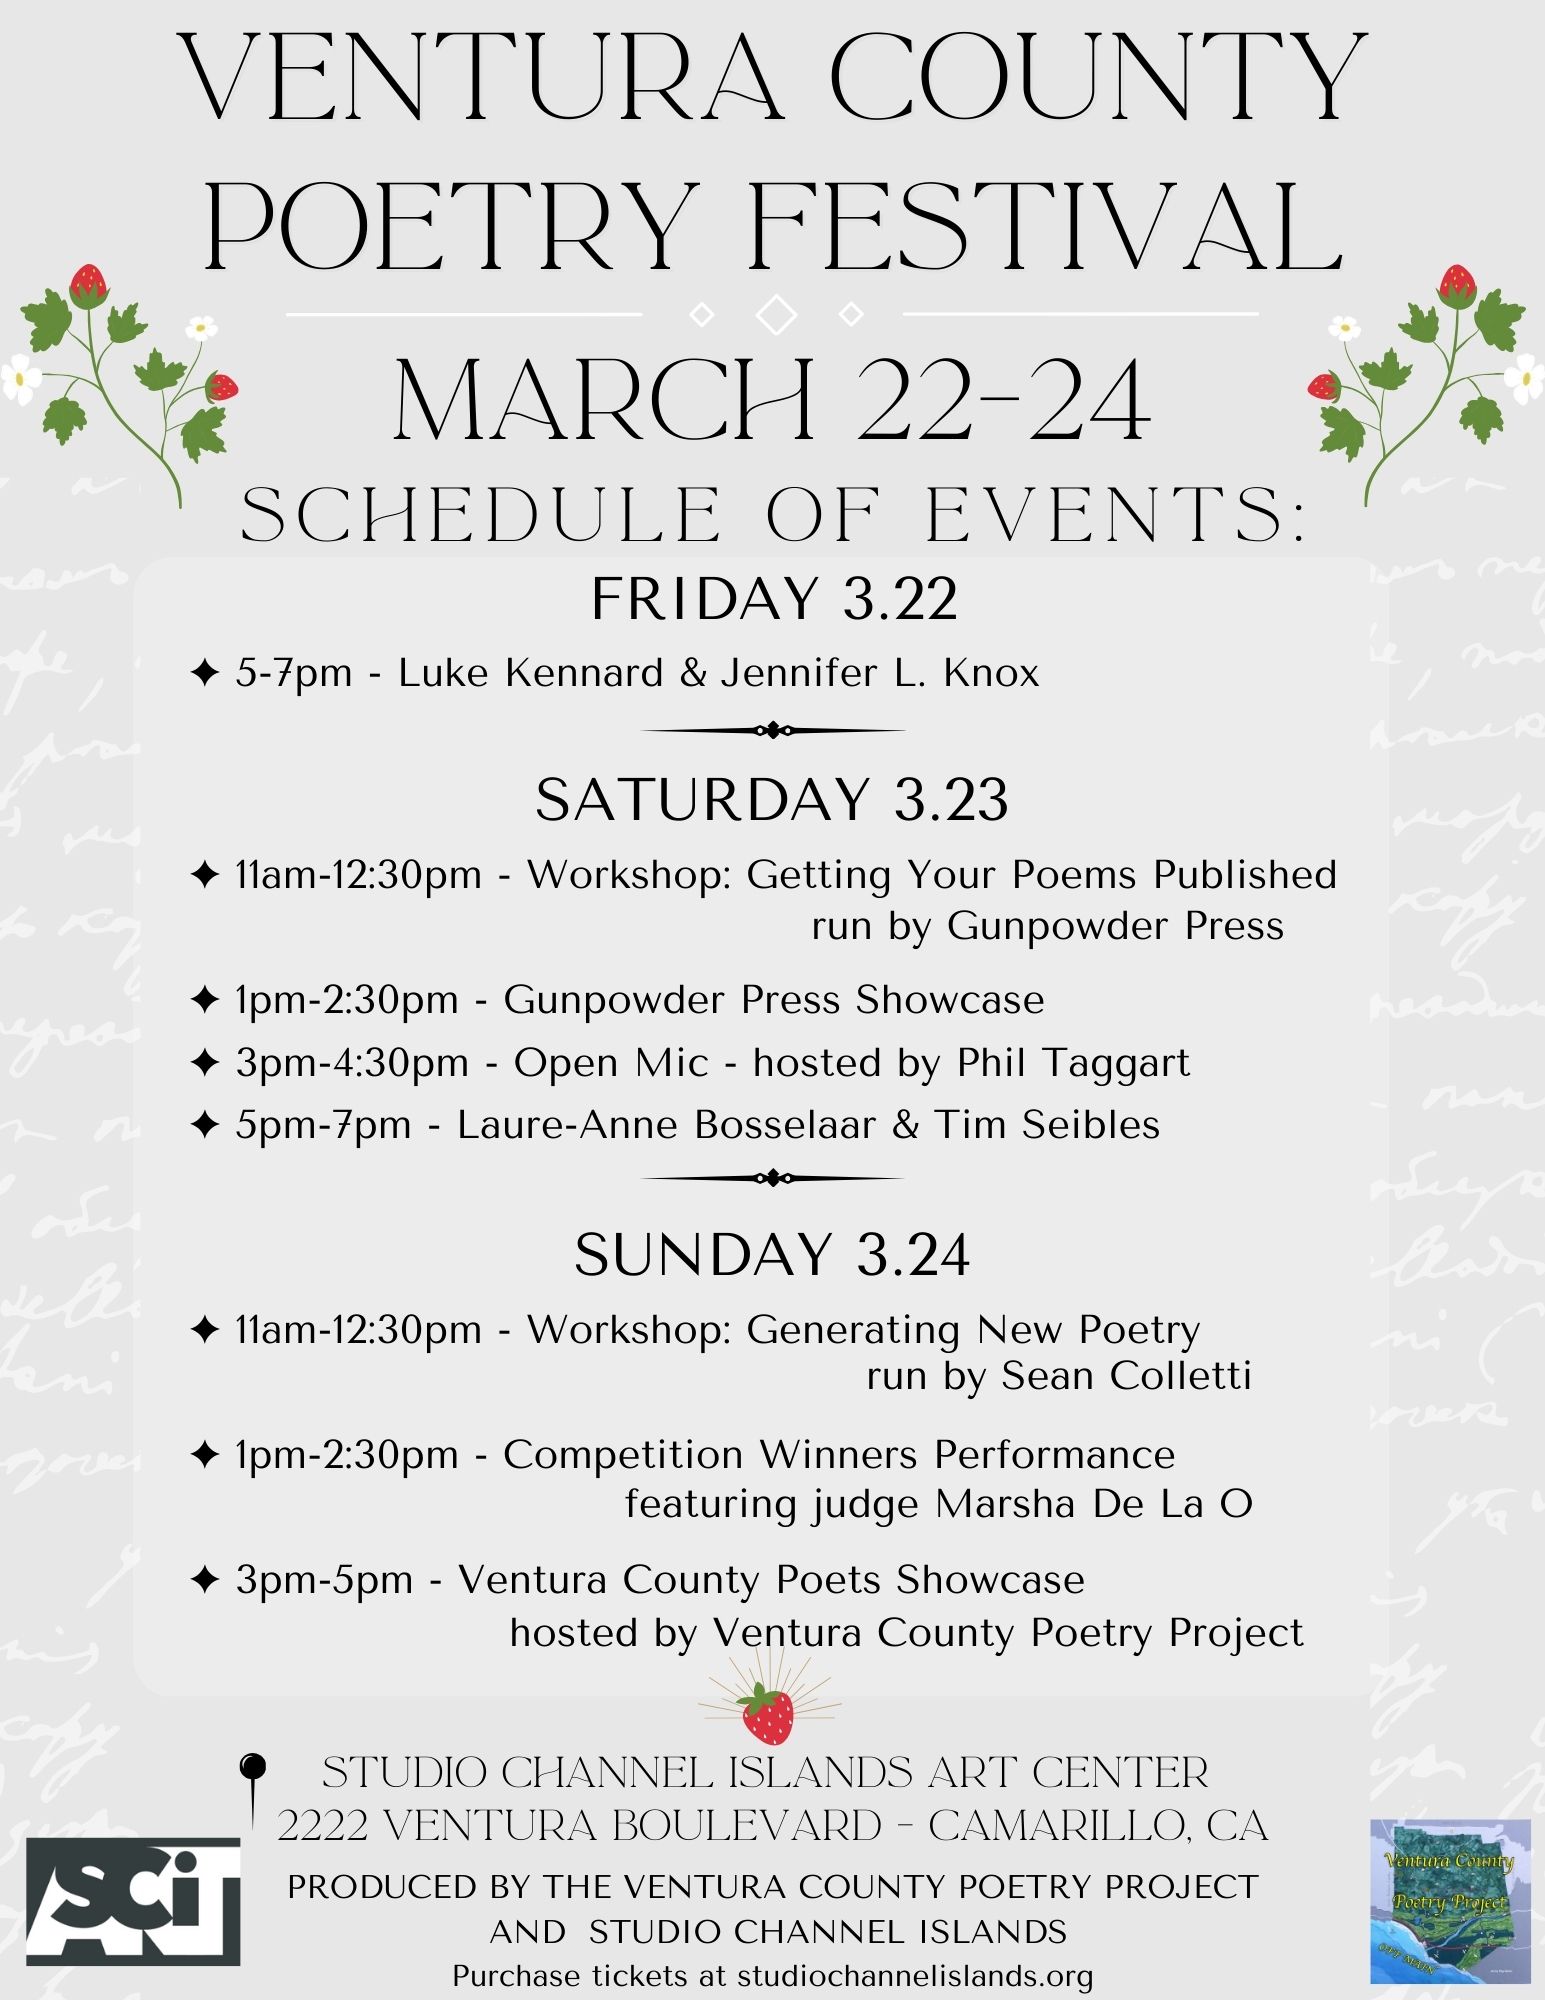 VENTURA COUNTY POETRY FESTIVAL MARCH 22-24 SCHEDULE OF EVENTS: FRIDAY 3.22 ~ 5-7pm - Luke Kennard & Jennifer L. Knox SATURDAY 3.23 * 11am-12:30pm - Workshop: Getting Your Poems Published run by Gunpowder Press * 1pm-2:30pm - Gunpowder Press Showcase • 3pm-4:30pm - Open Mic - hosted by Phil Taggart 5pm-7pm - Laure-Anne Bosselaar & Tim Seibles SUNDAY 3.24 11am-12:30pm - Workshop: Generating New Poetry run by Sean Colletti ~ 1pm-2:30pm - Competition Winners Performance featuring judge Marsha De La O * 3pm-5pm - Ventura County Poets Showcase hosted by Ventura County Poetry Project STUDIO CHANNEL ISLANDS ART CENTER 2222 VENTURA BOULEVARD - CAMARILLO, CA PRODUCED BY THE VENTURA COUNTY POETRY PROJECT AND STUDIO CHANNEL ISLANDS Purchase tickets at studiochannelislands.org